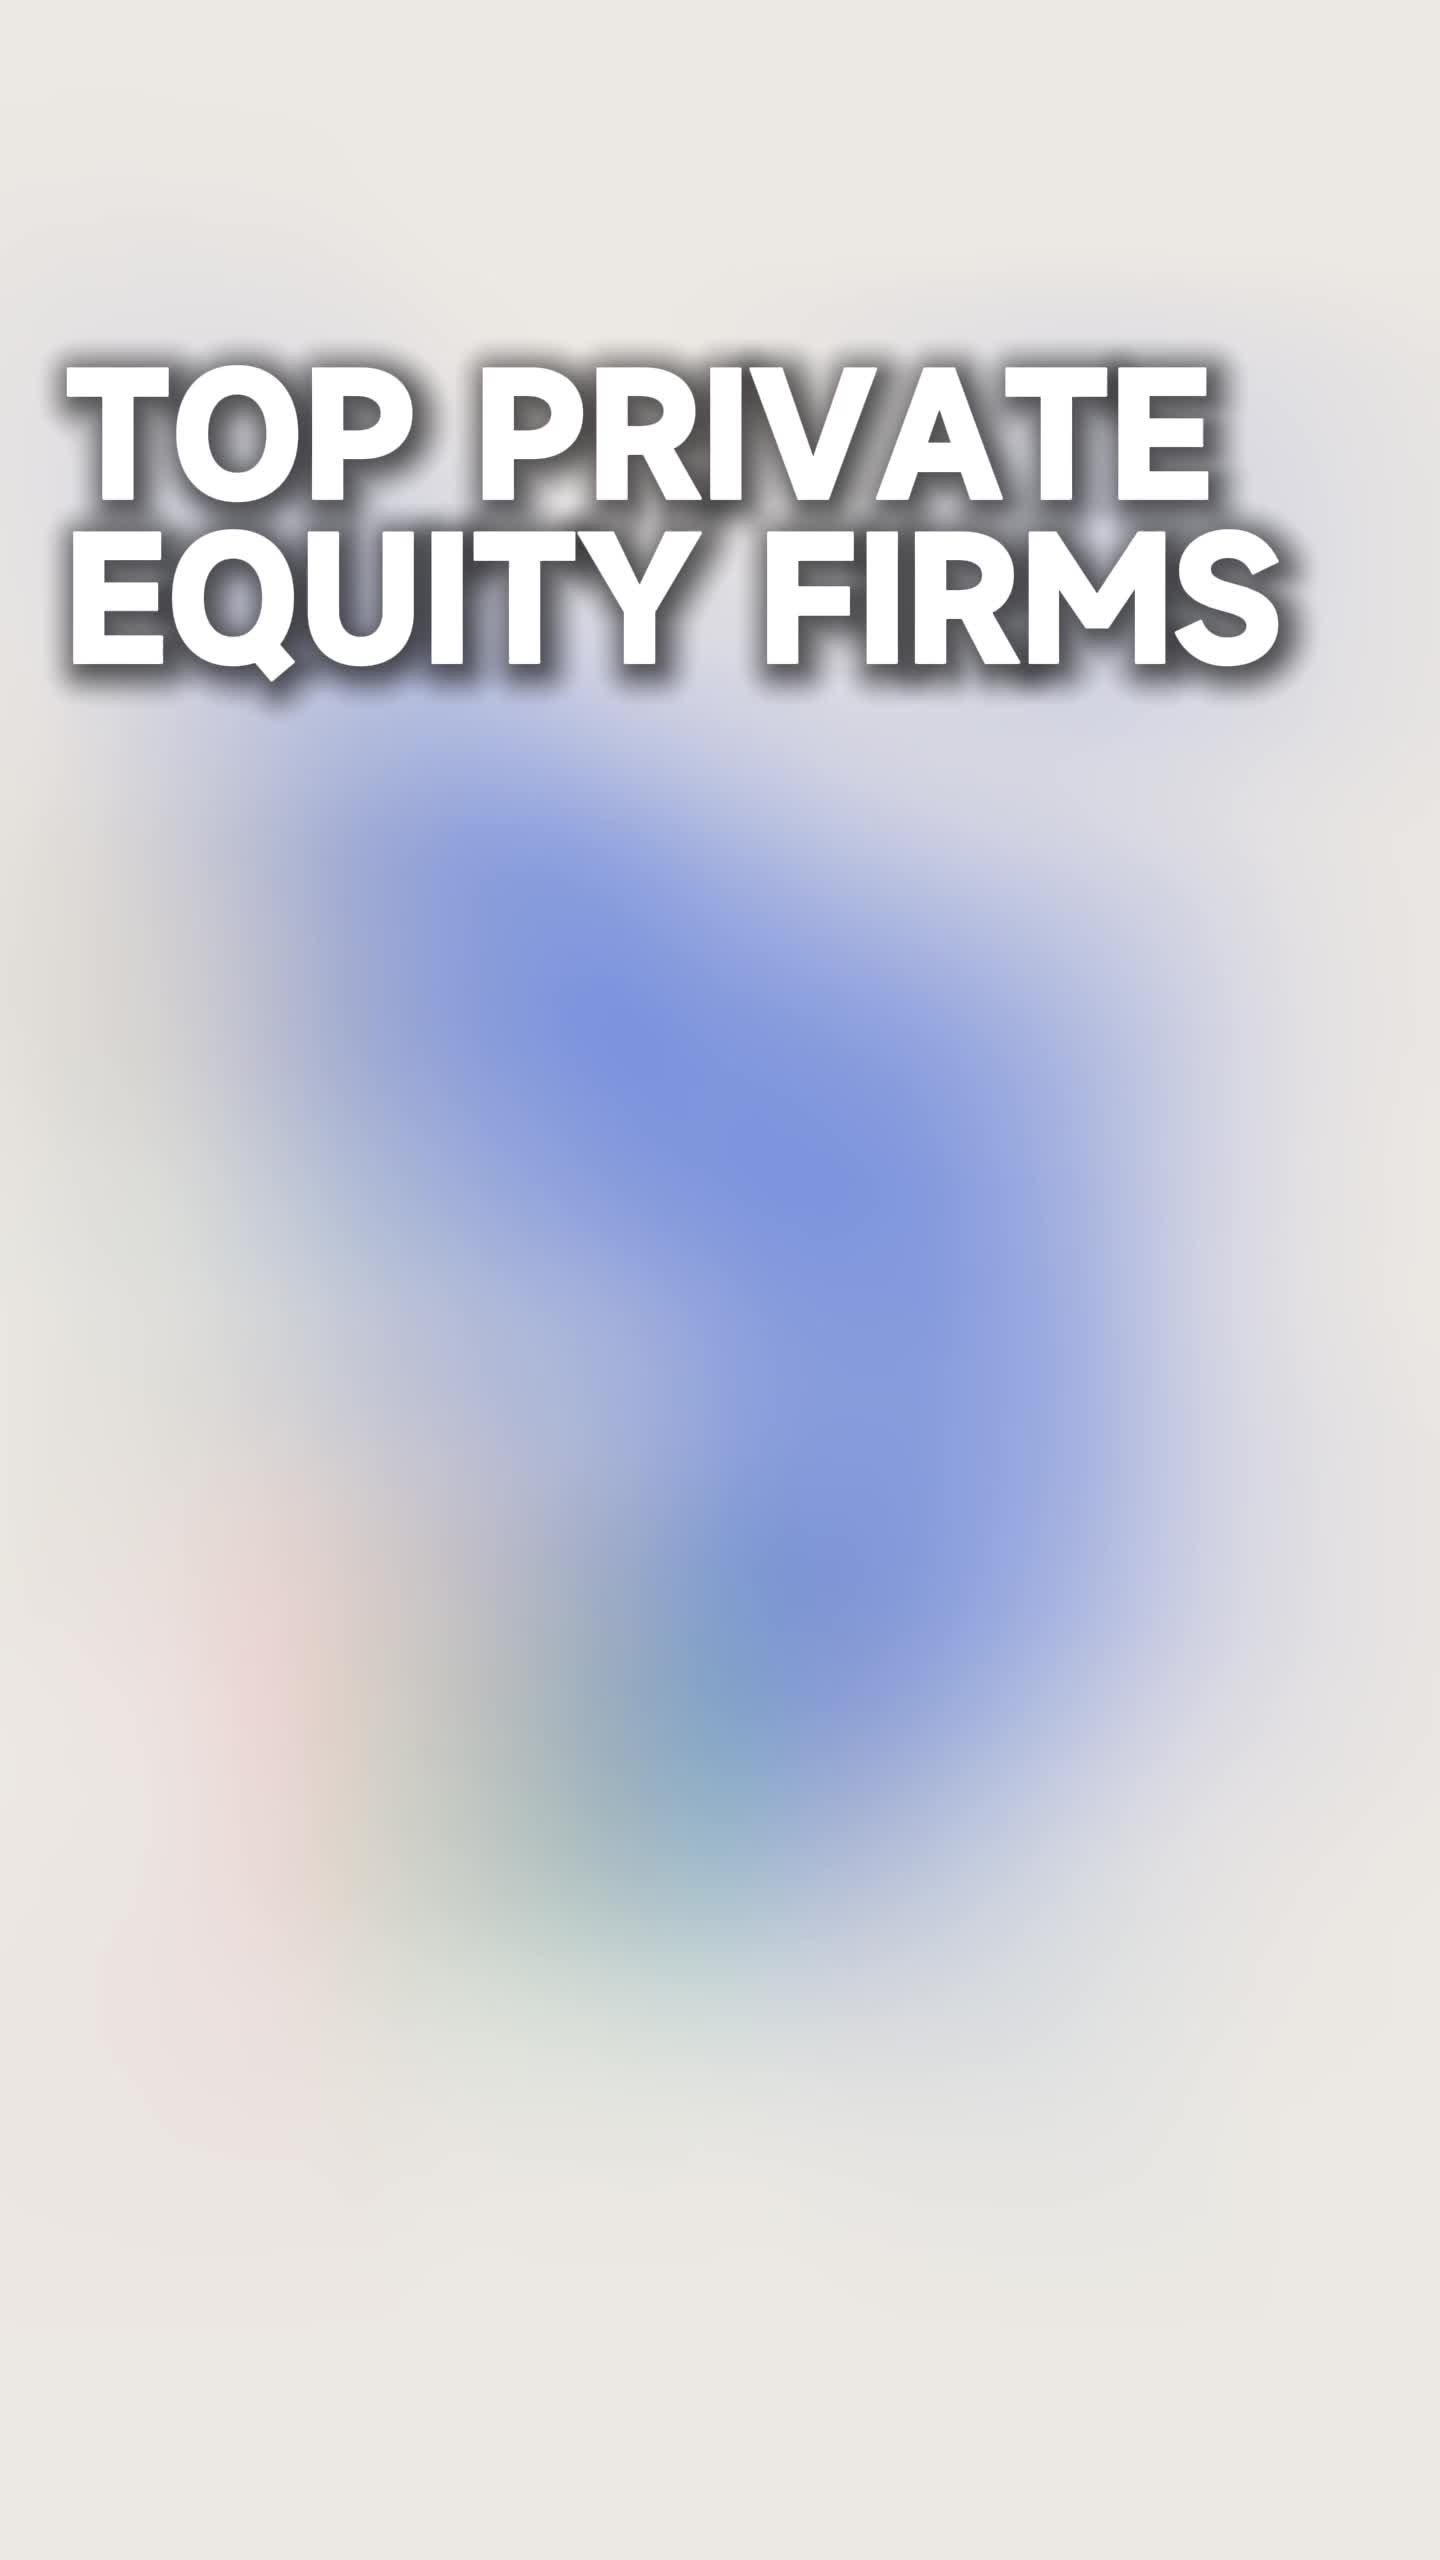 TOP PRIVATE EQUITY FIRMS